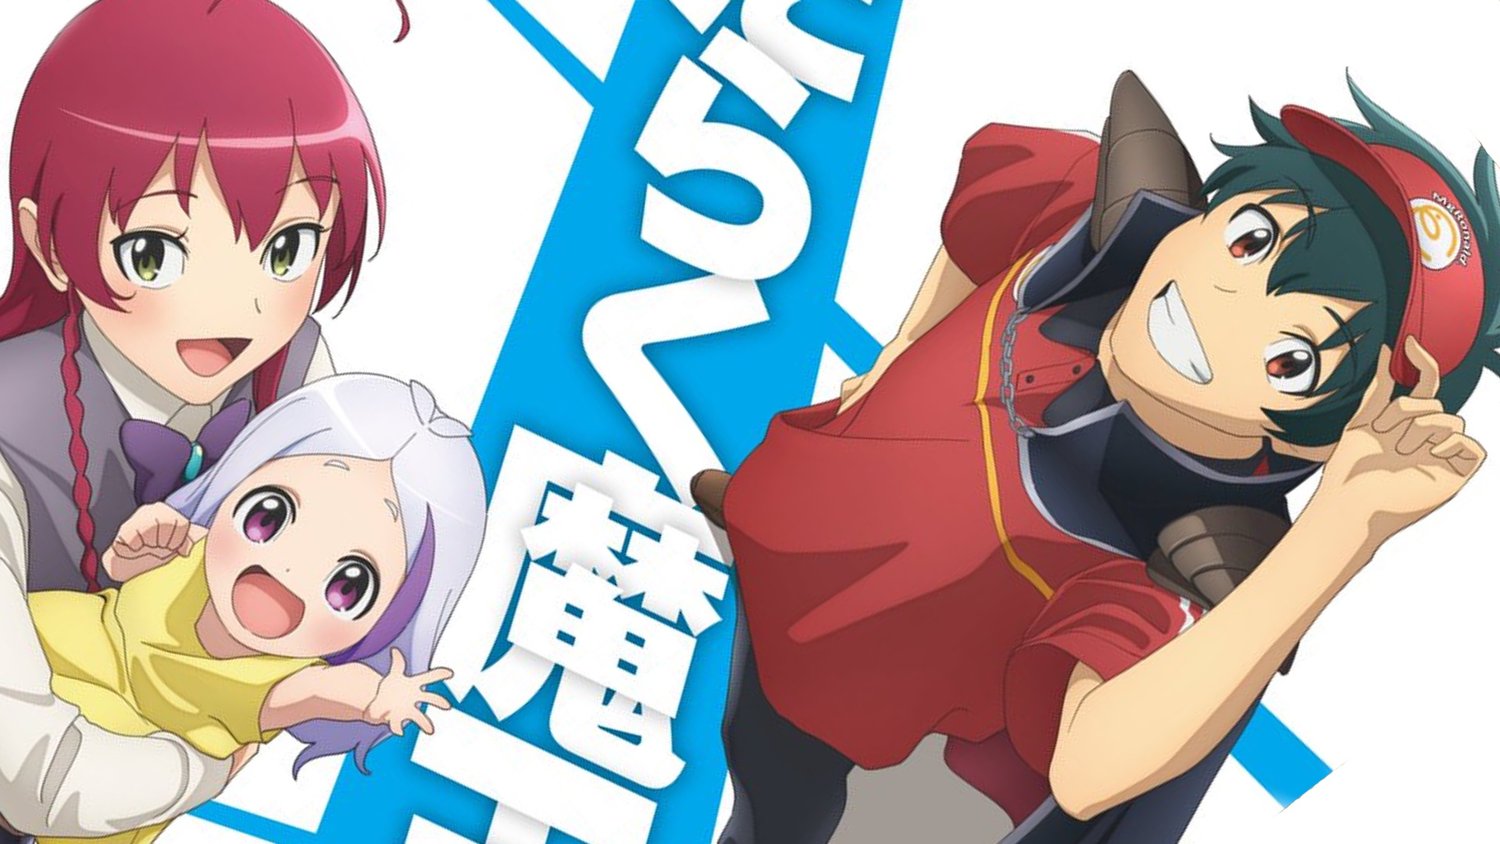 The Devil is a Part-Timer Season 2 Releases Episode 3 Preview